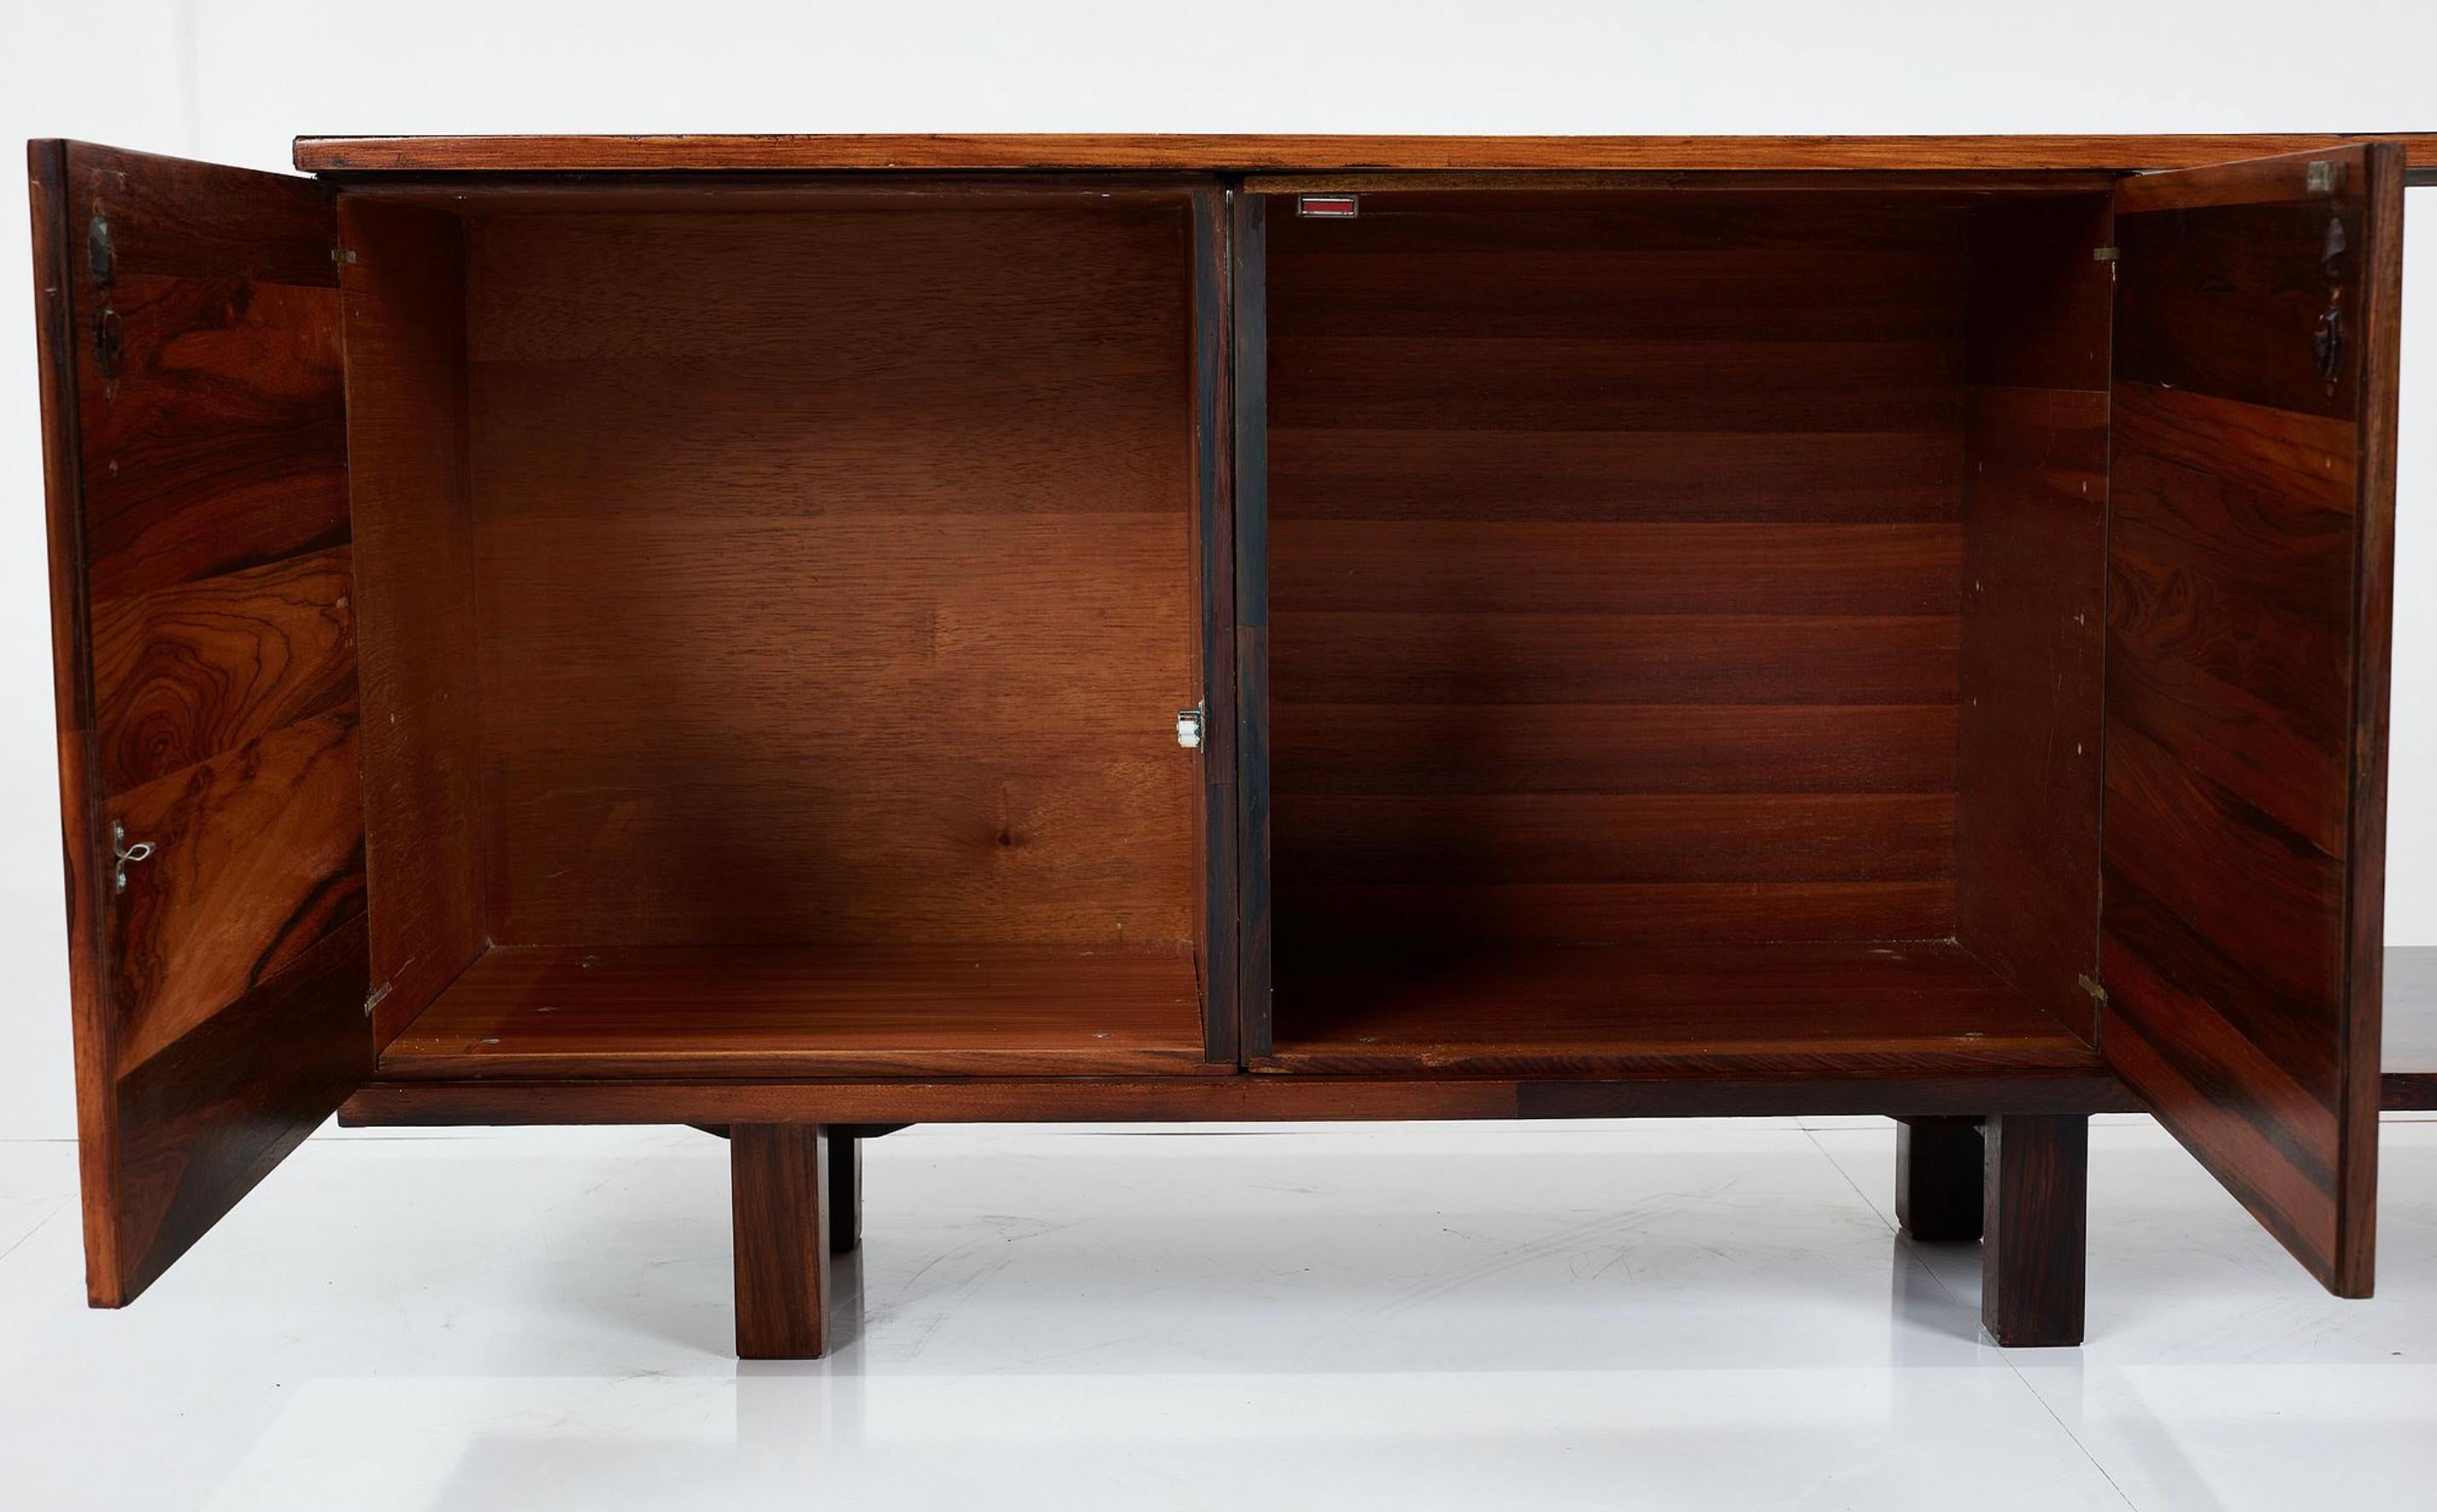 Jorge Zalszupin Rosewood Mid-Century Credenza for L'Atelier, Brazil, 1960s For Sale 2